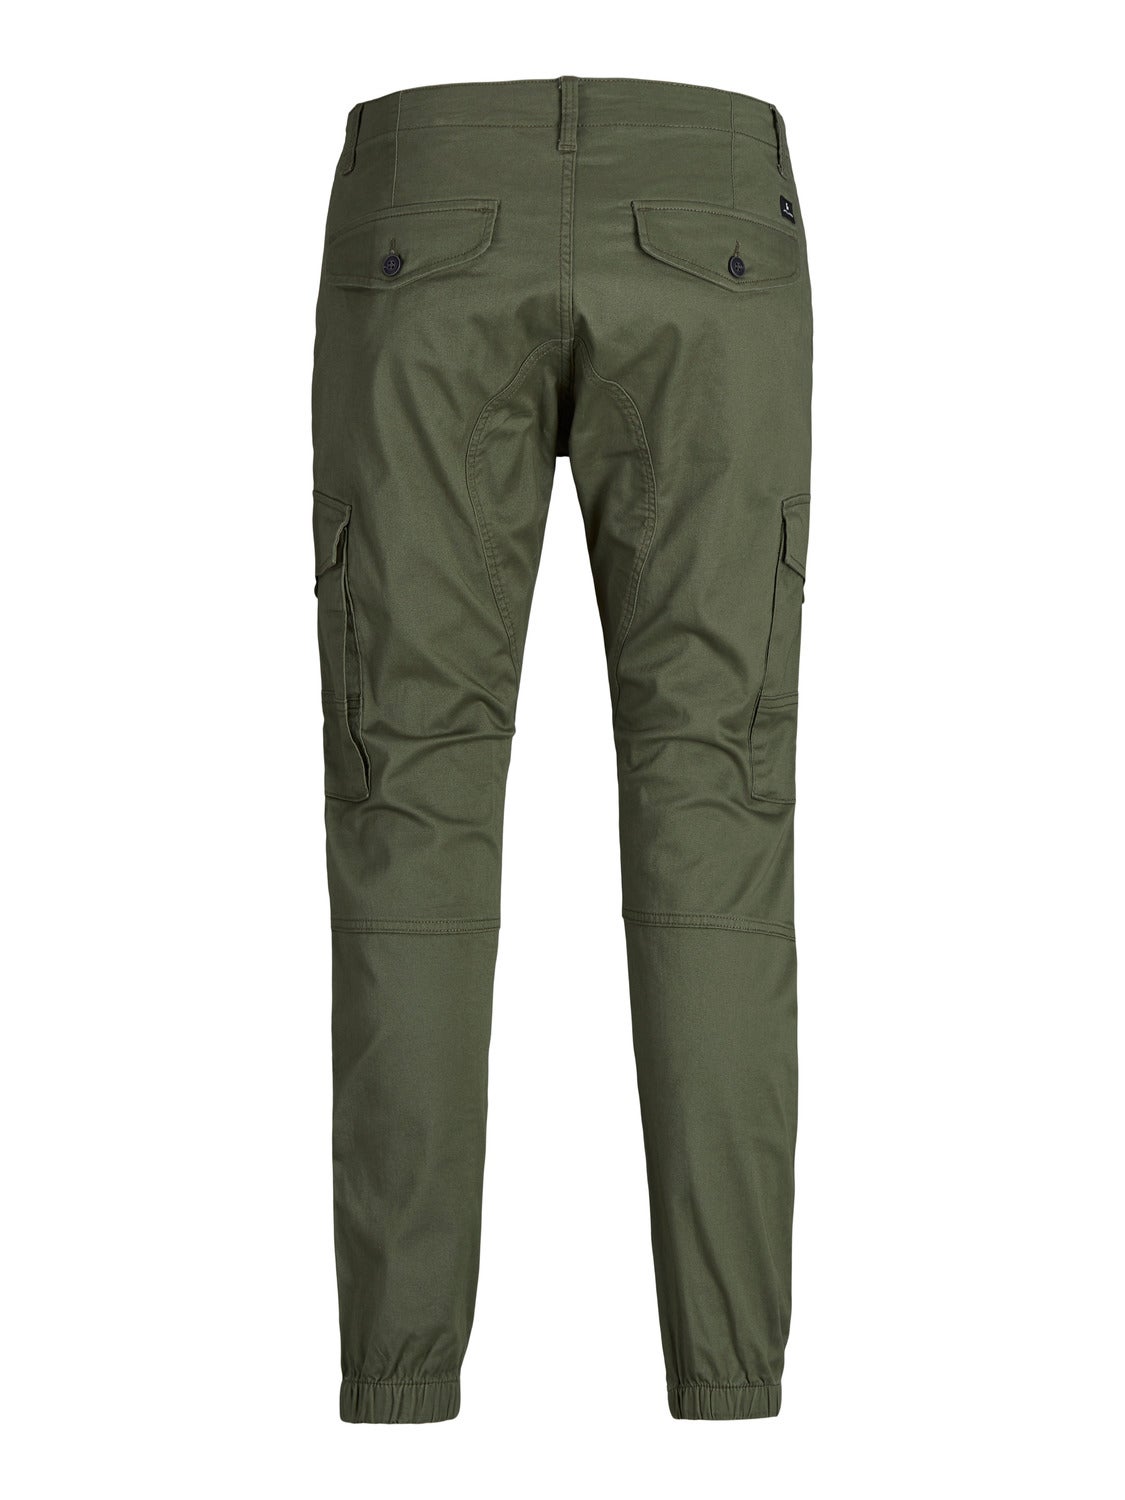 Jack and Jones Cargo Trousers Chinos Mens Jeans Slim-Fit